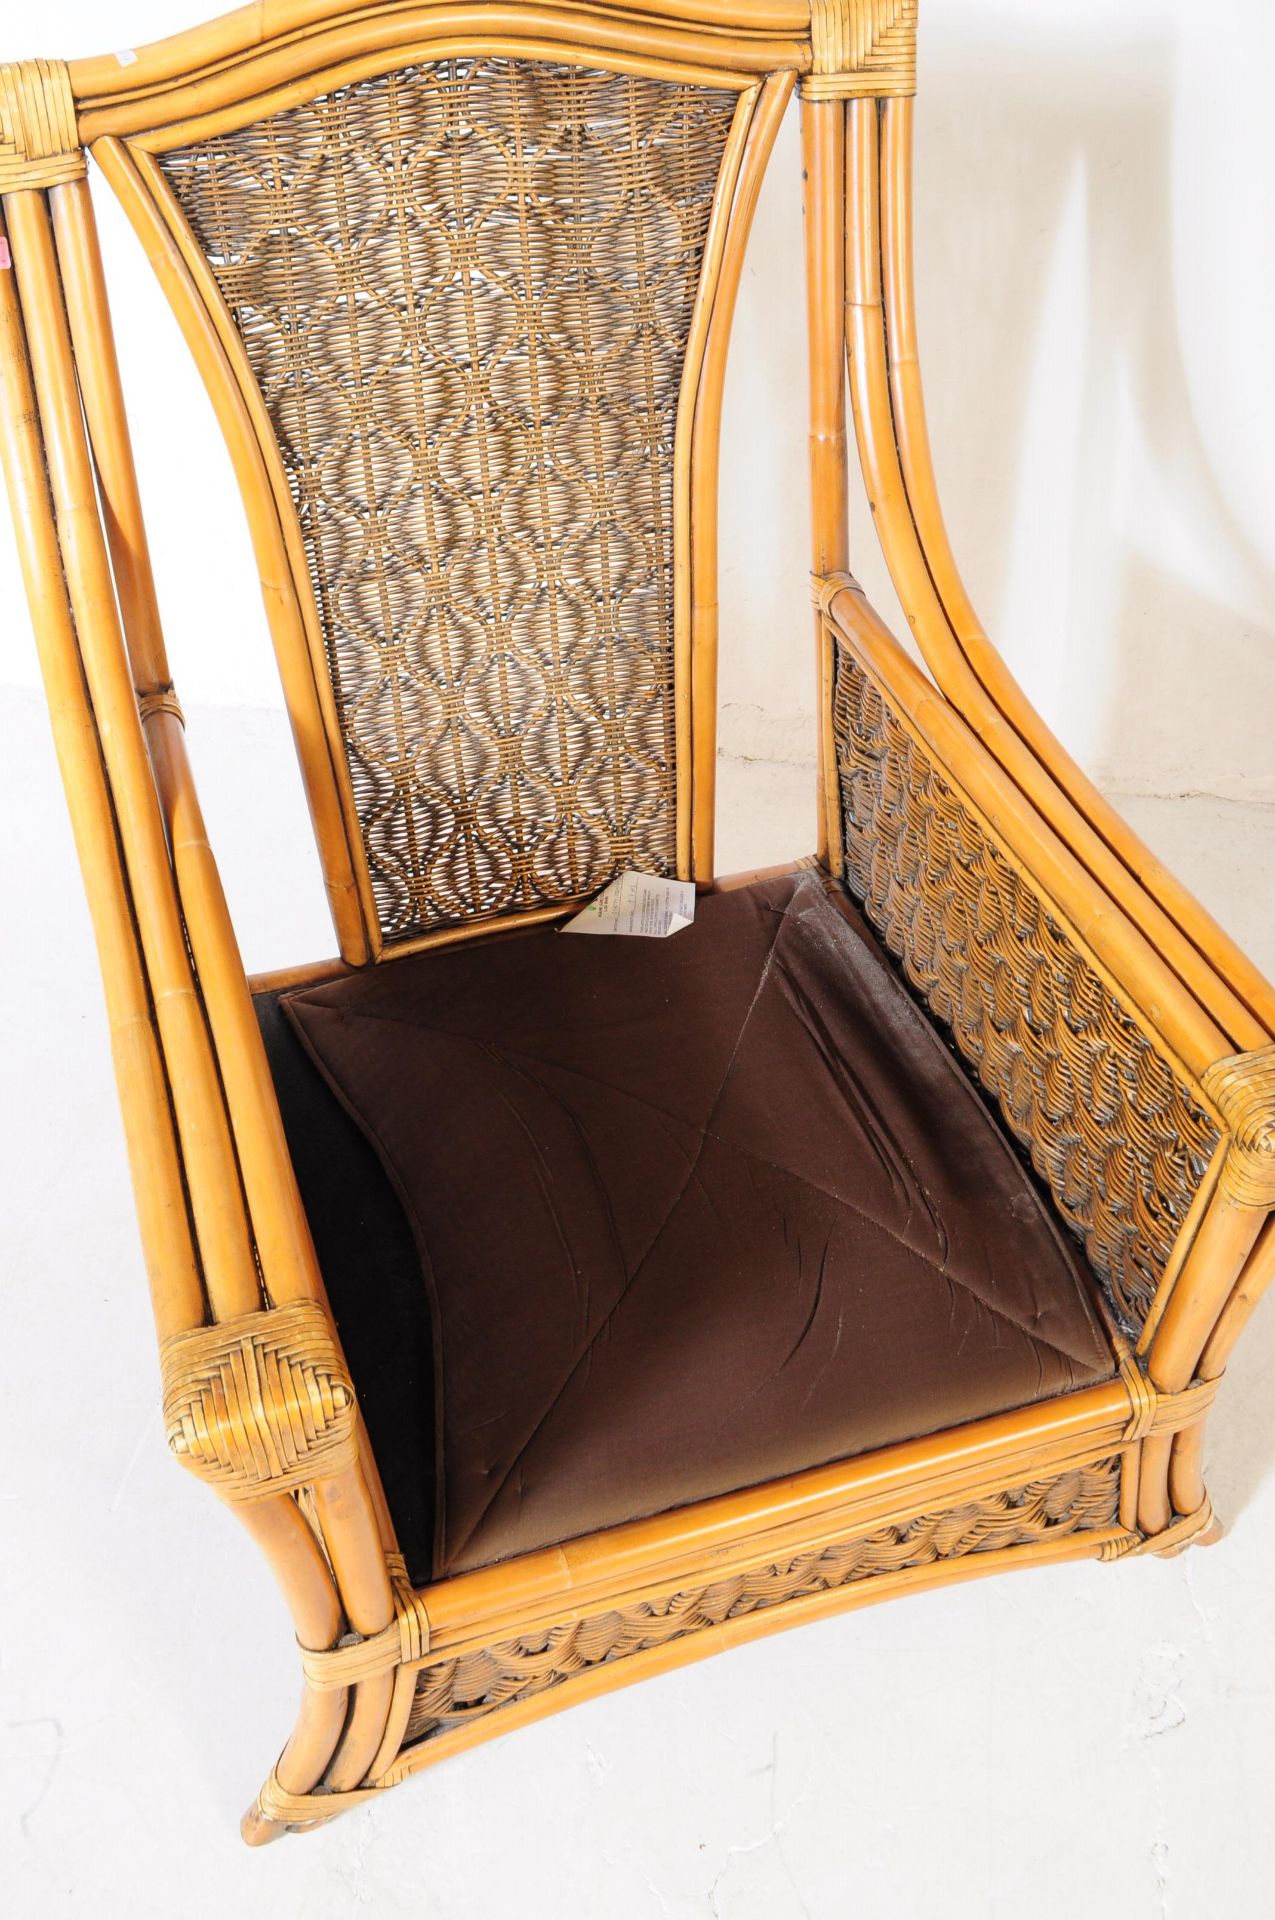 PAIR OF LATE 20TH CENTURY CIRCA 1980S BAMBOO ARMCHAIRS - Image 5 of 6